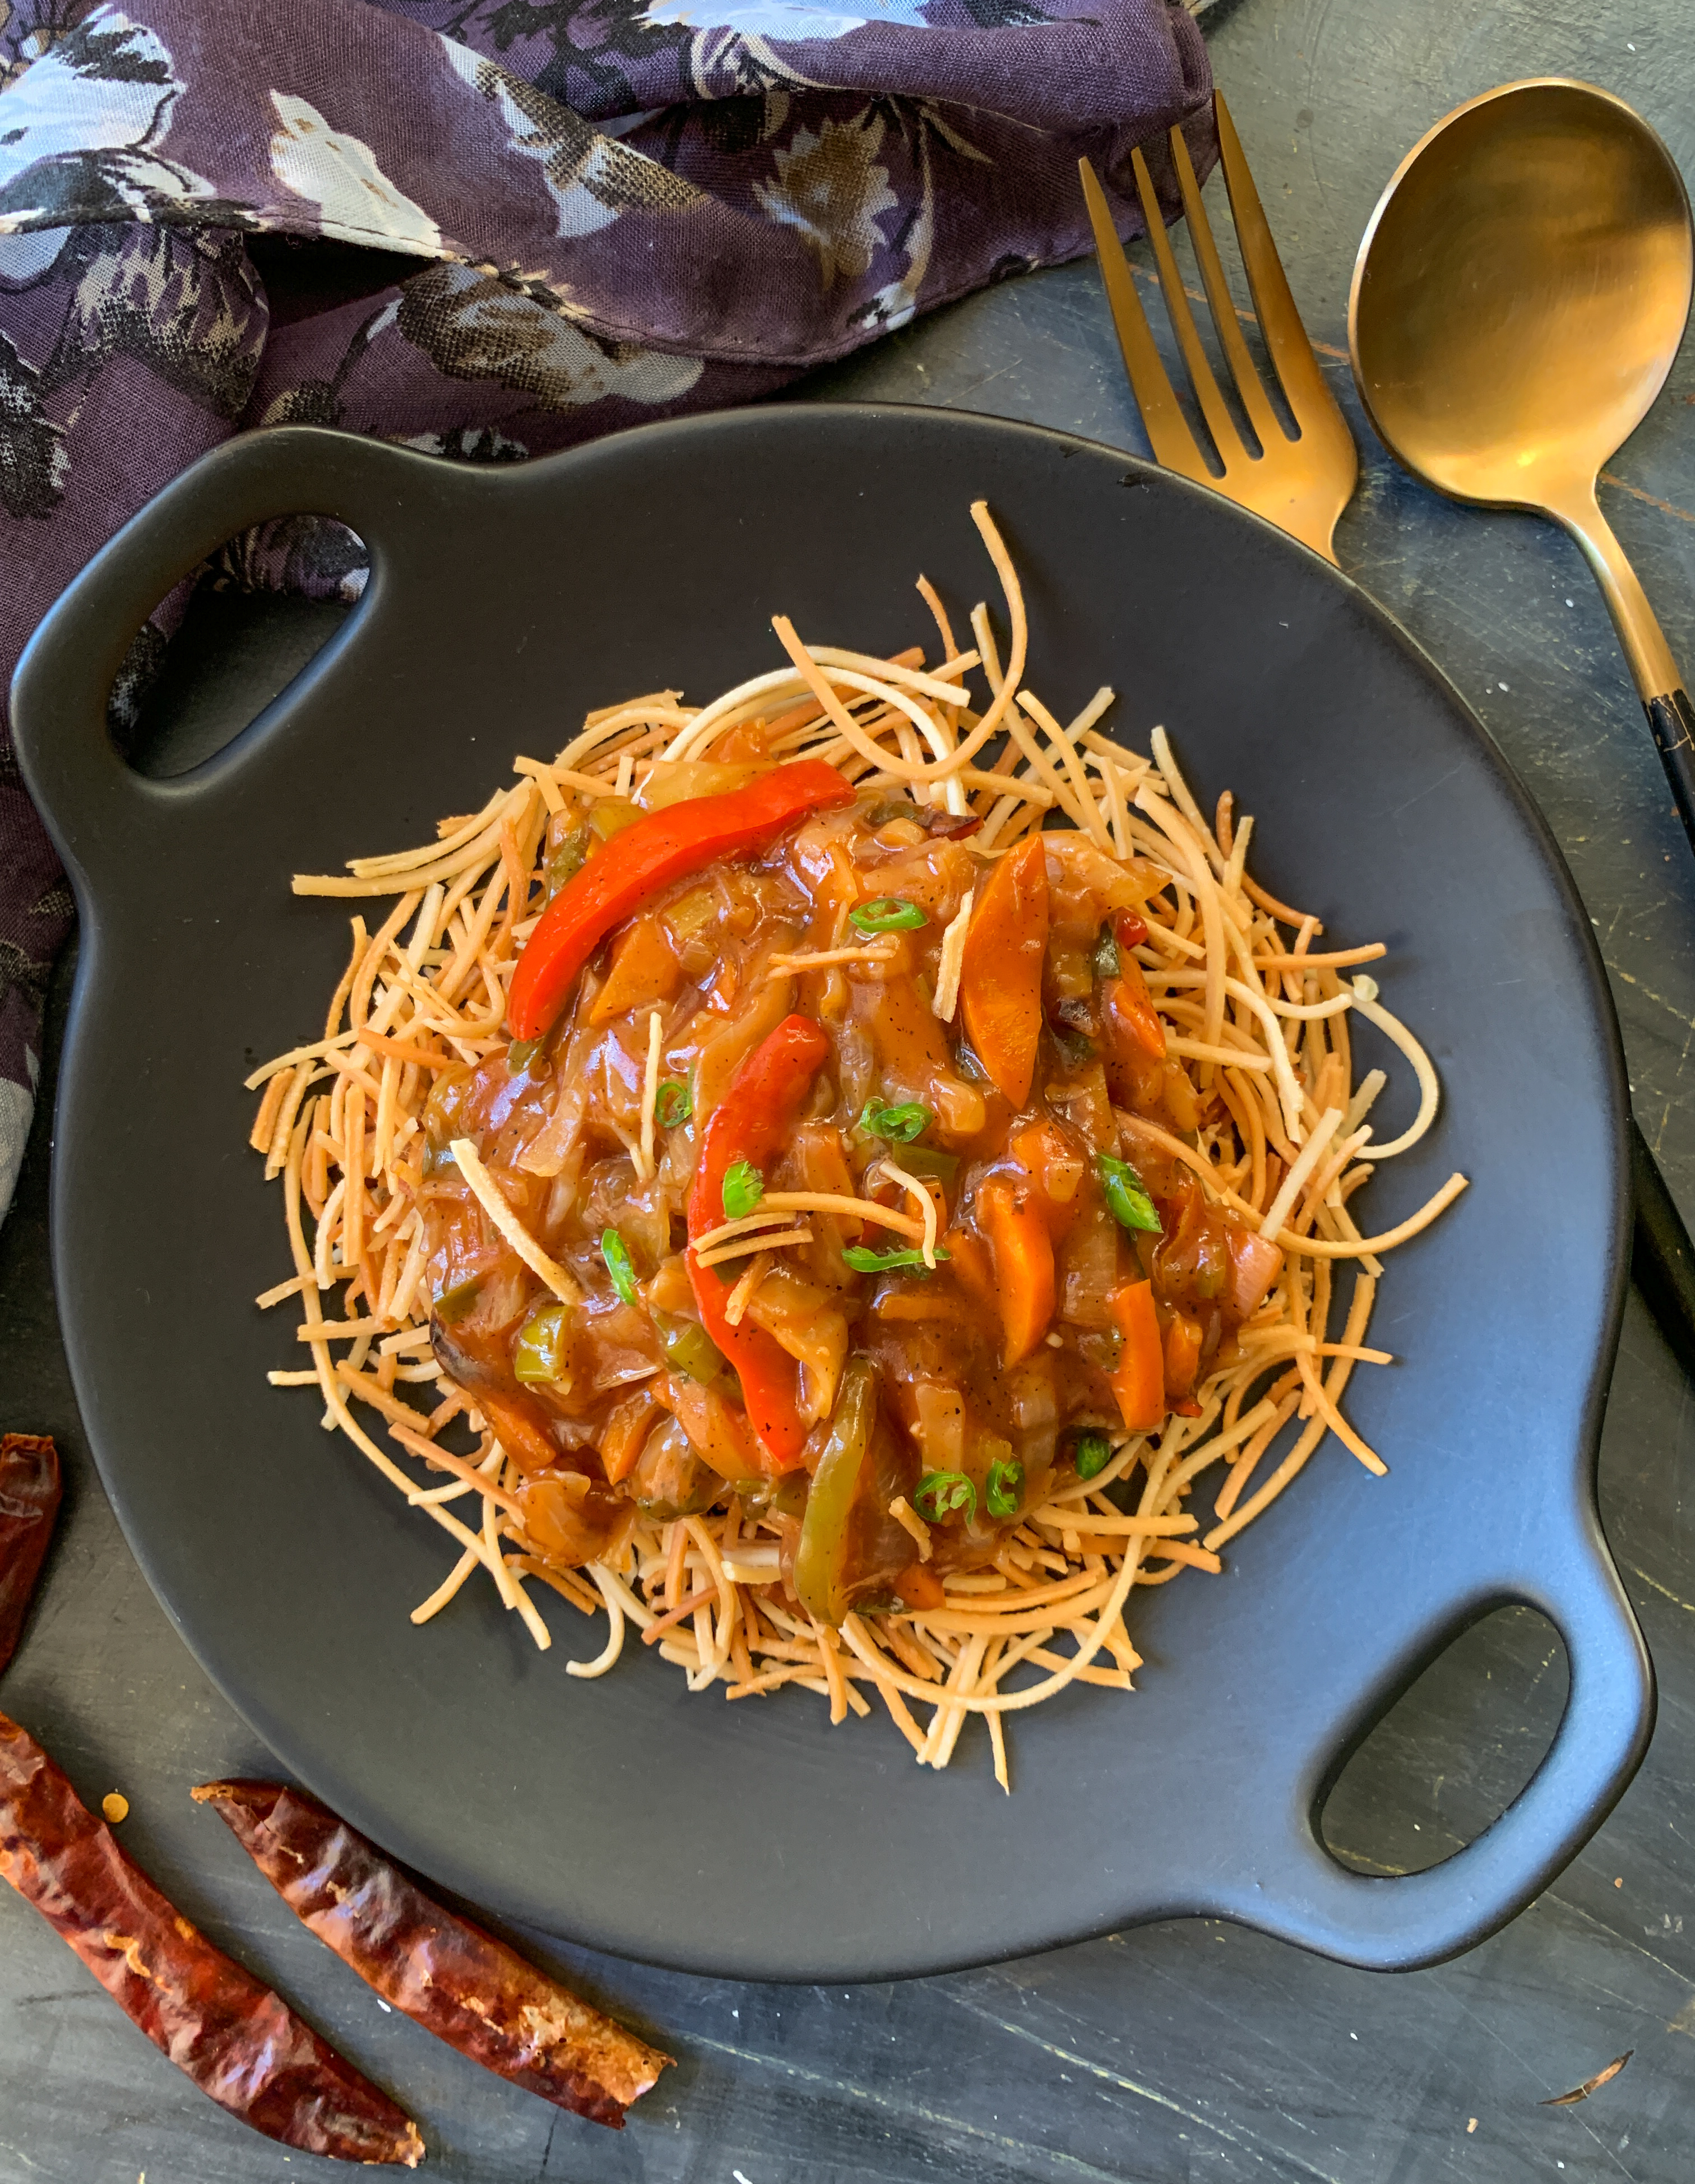 American Chop Suey Recipe Crispy Noodles Topped With Sweet And Sour Vegetables By Archana S Kitchen,Hummingbird Food Walmart